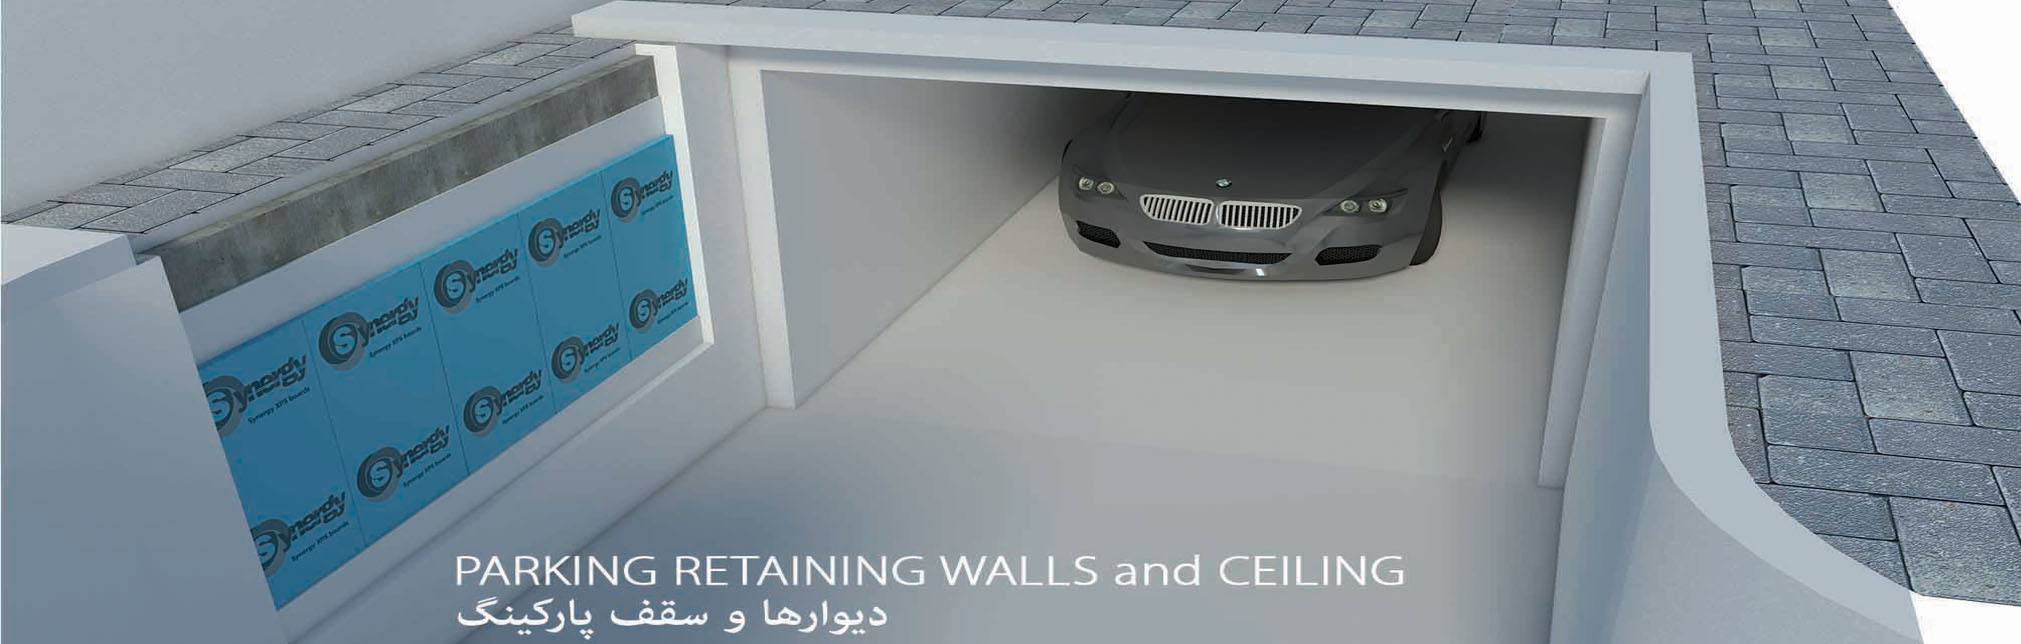 Parking Retaining Walls and Ceiling